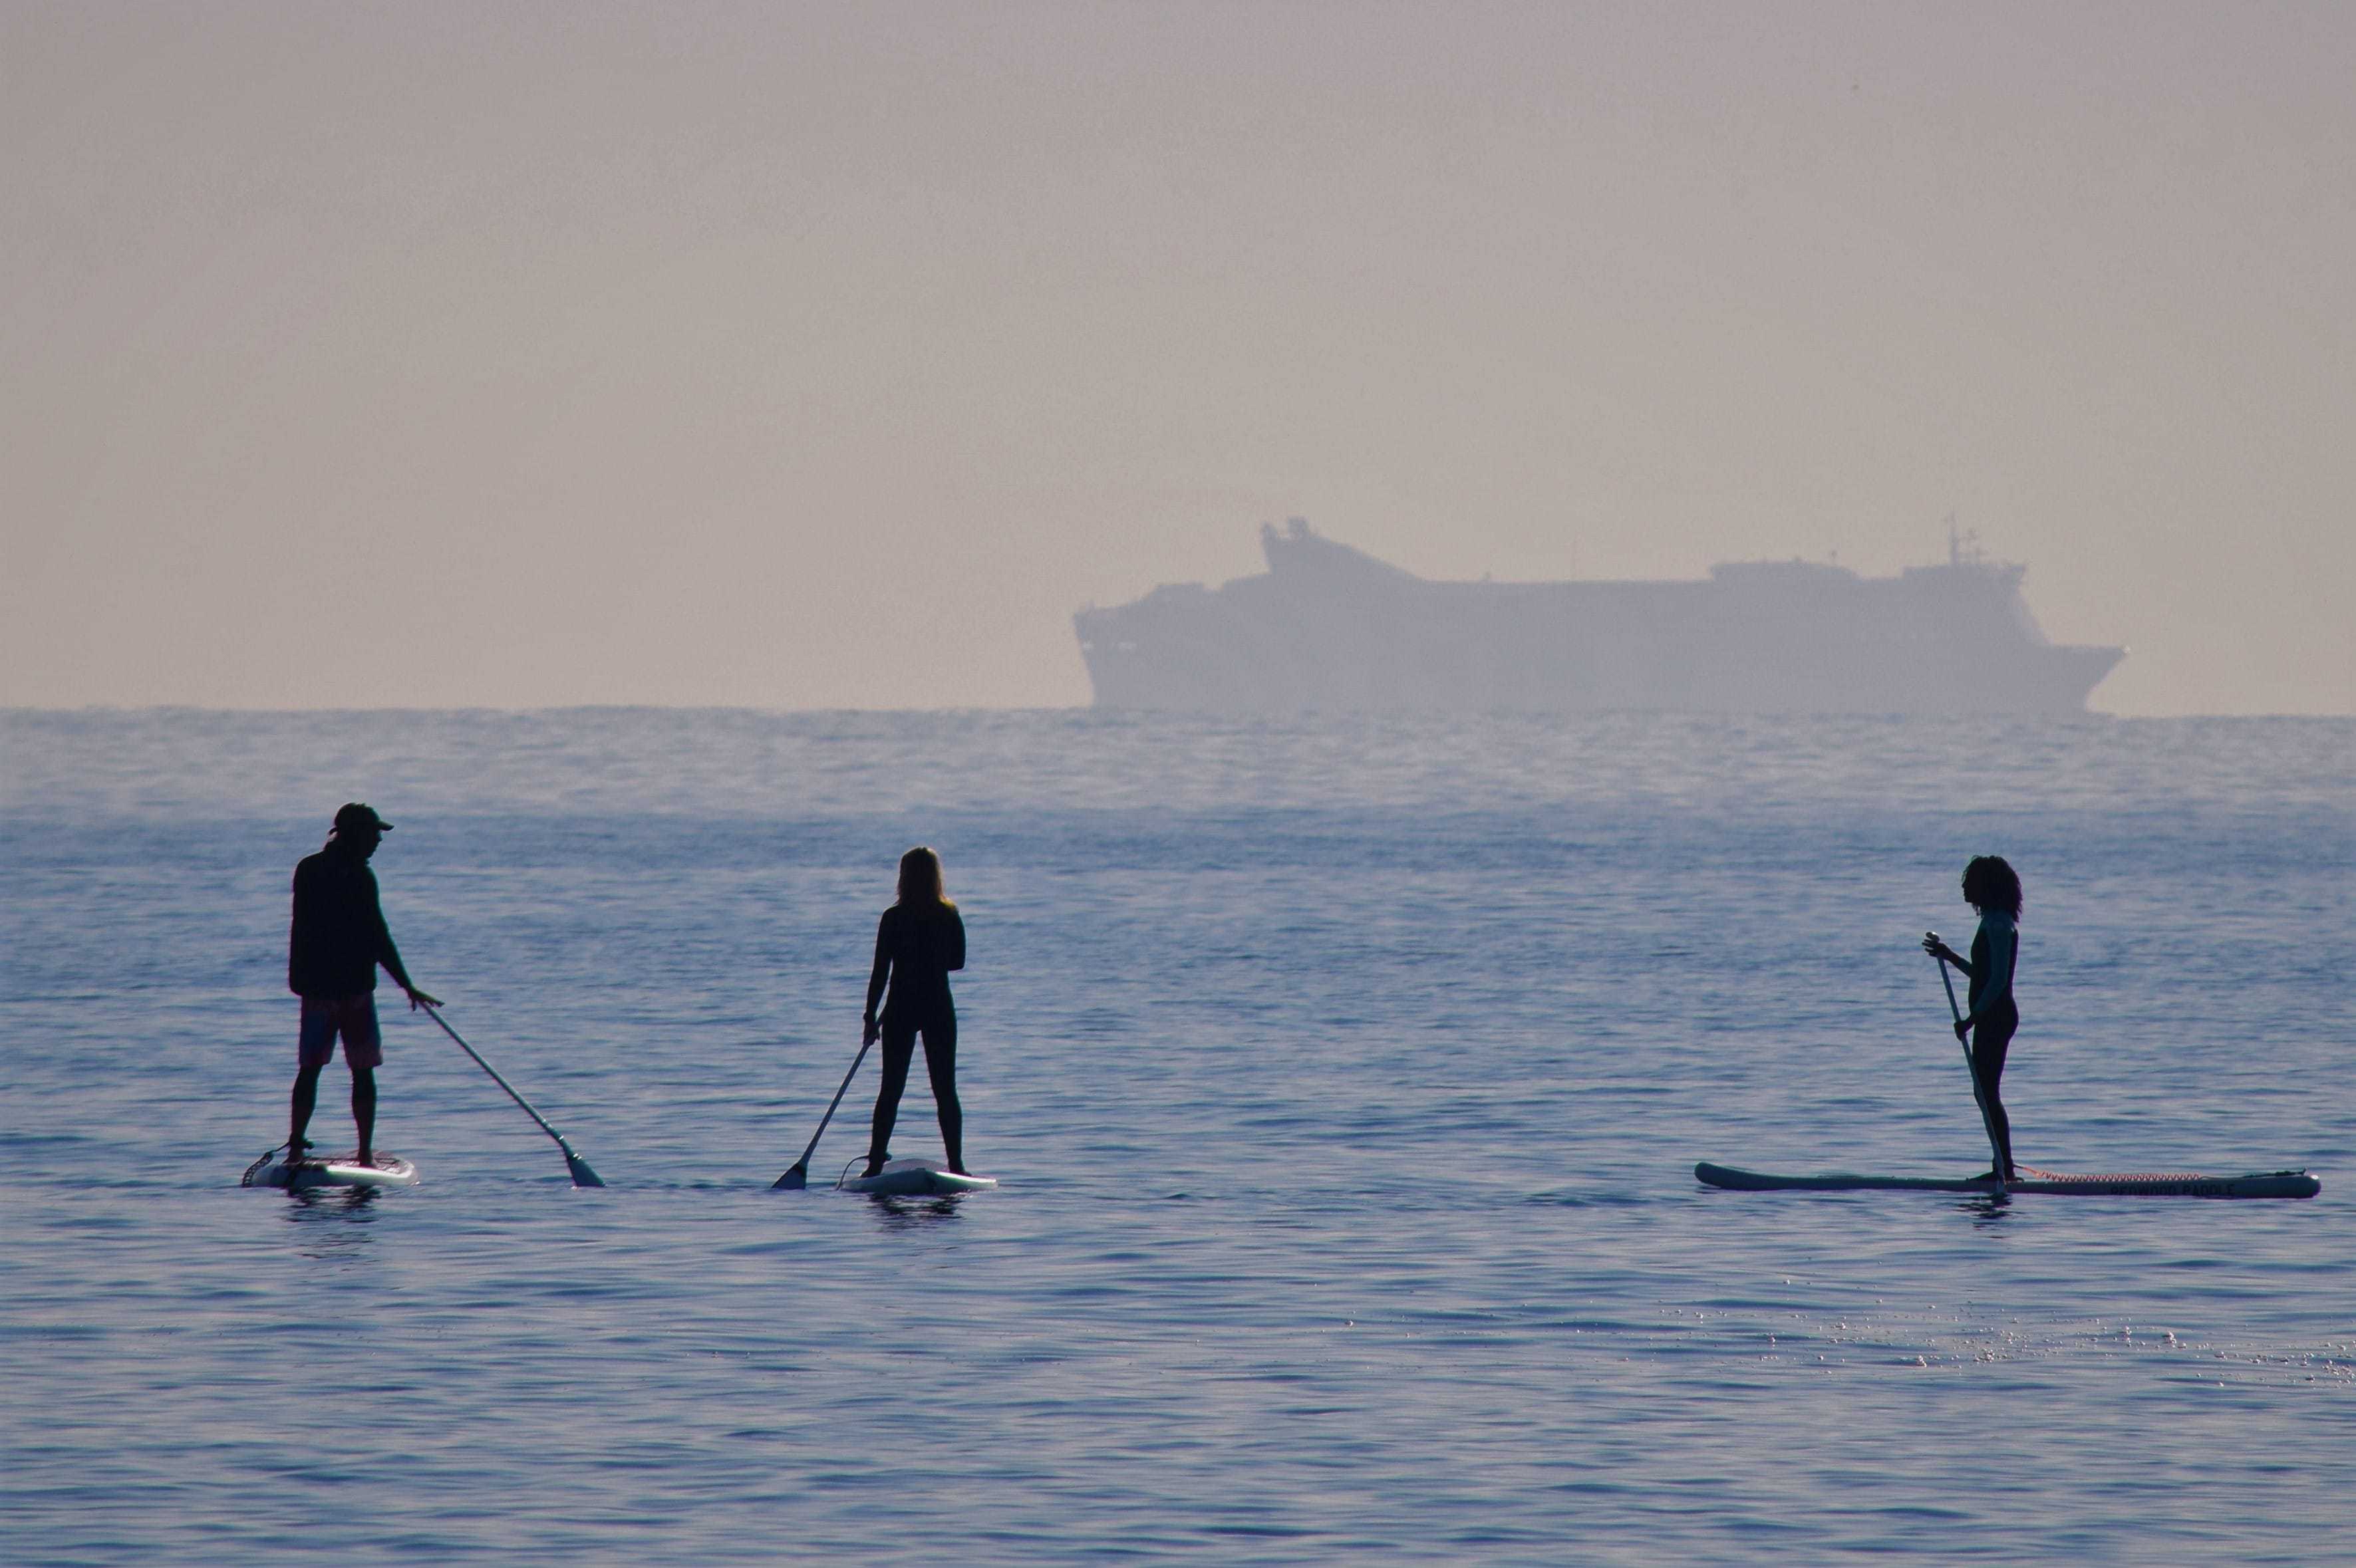 how much do paddle boards cost?